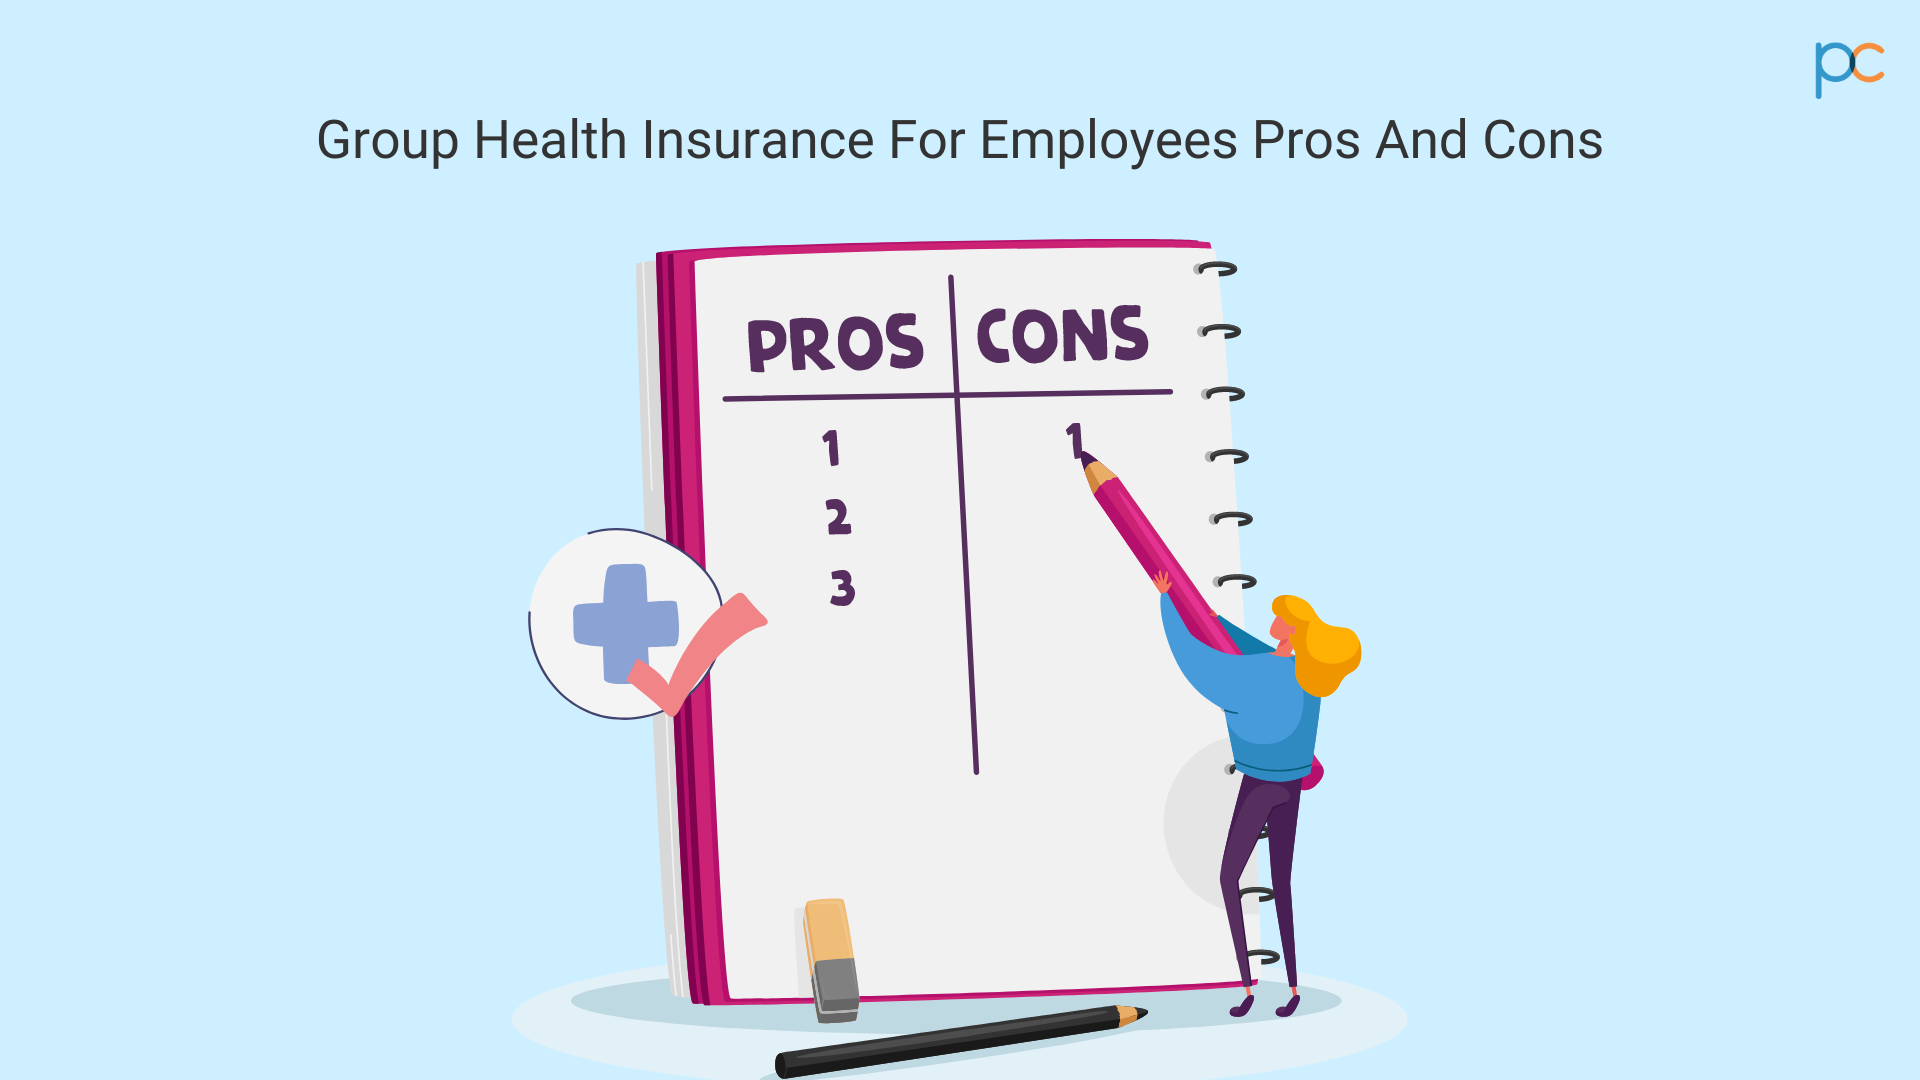 roup Health Insurance For Employees Pros And Cons